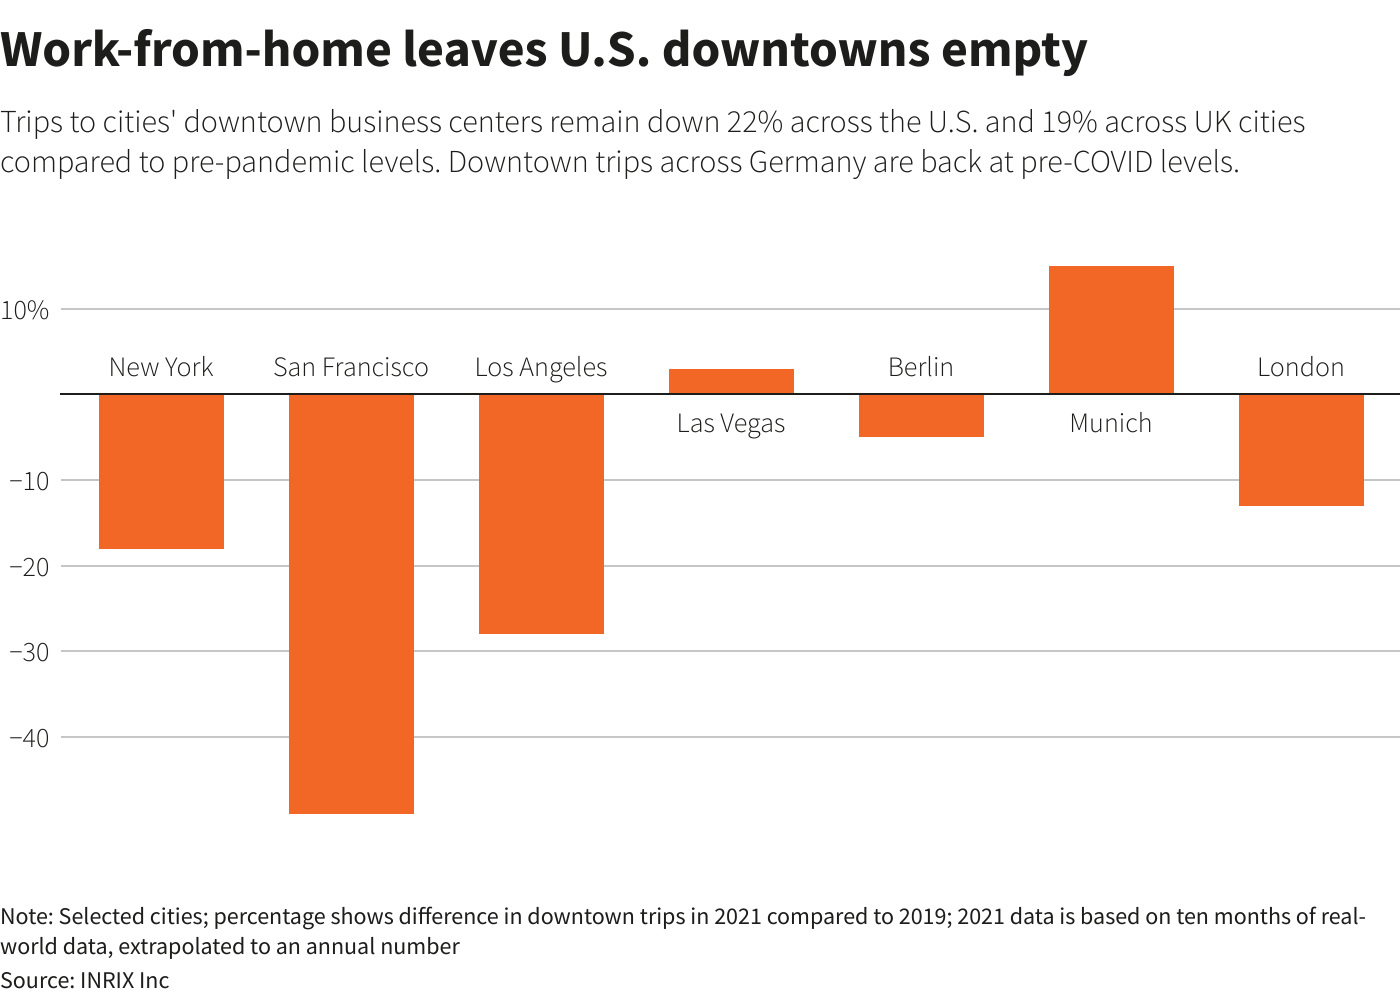 Work-from-home leaves U.S. downtowns empty